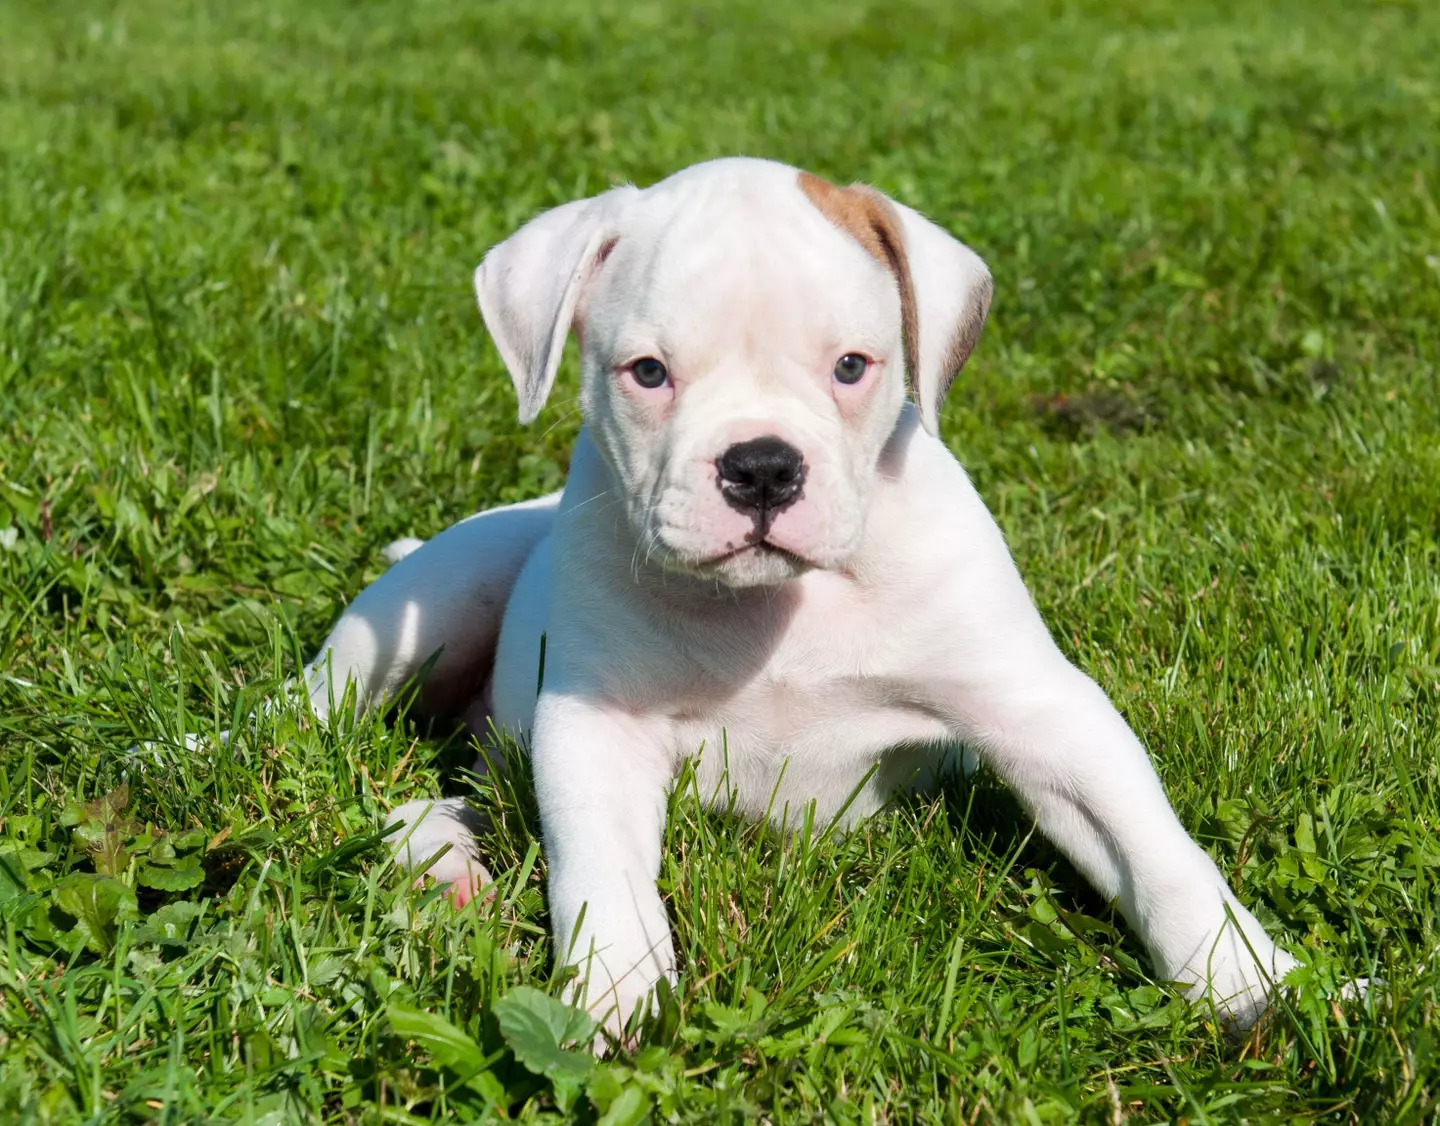 The inmate was jailed for trying to steal an American bulldog puppy